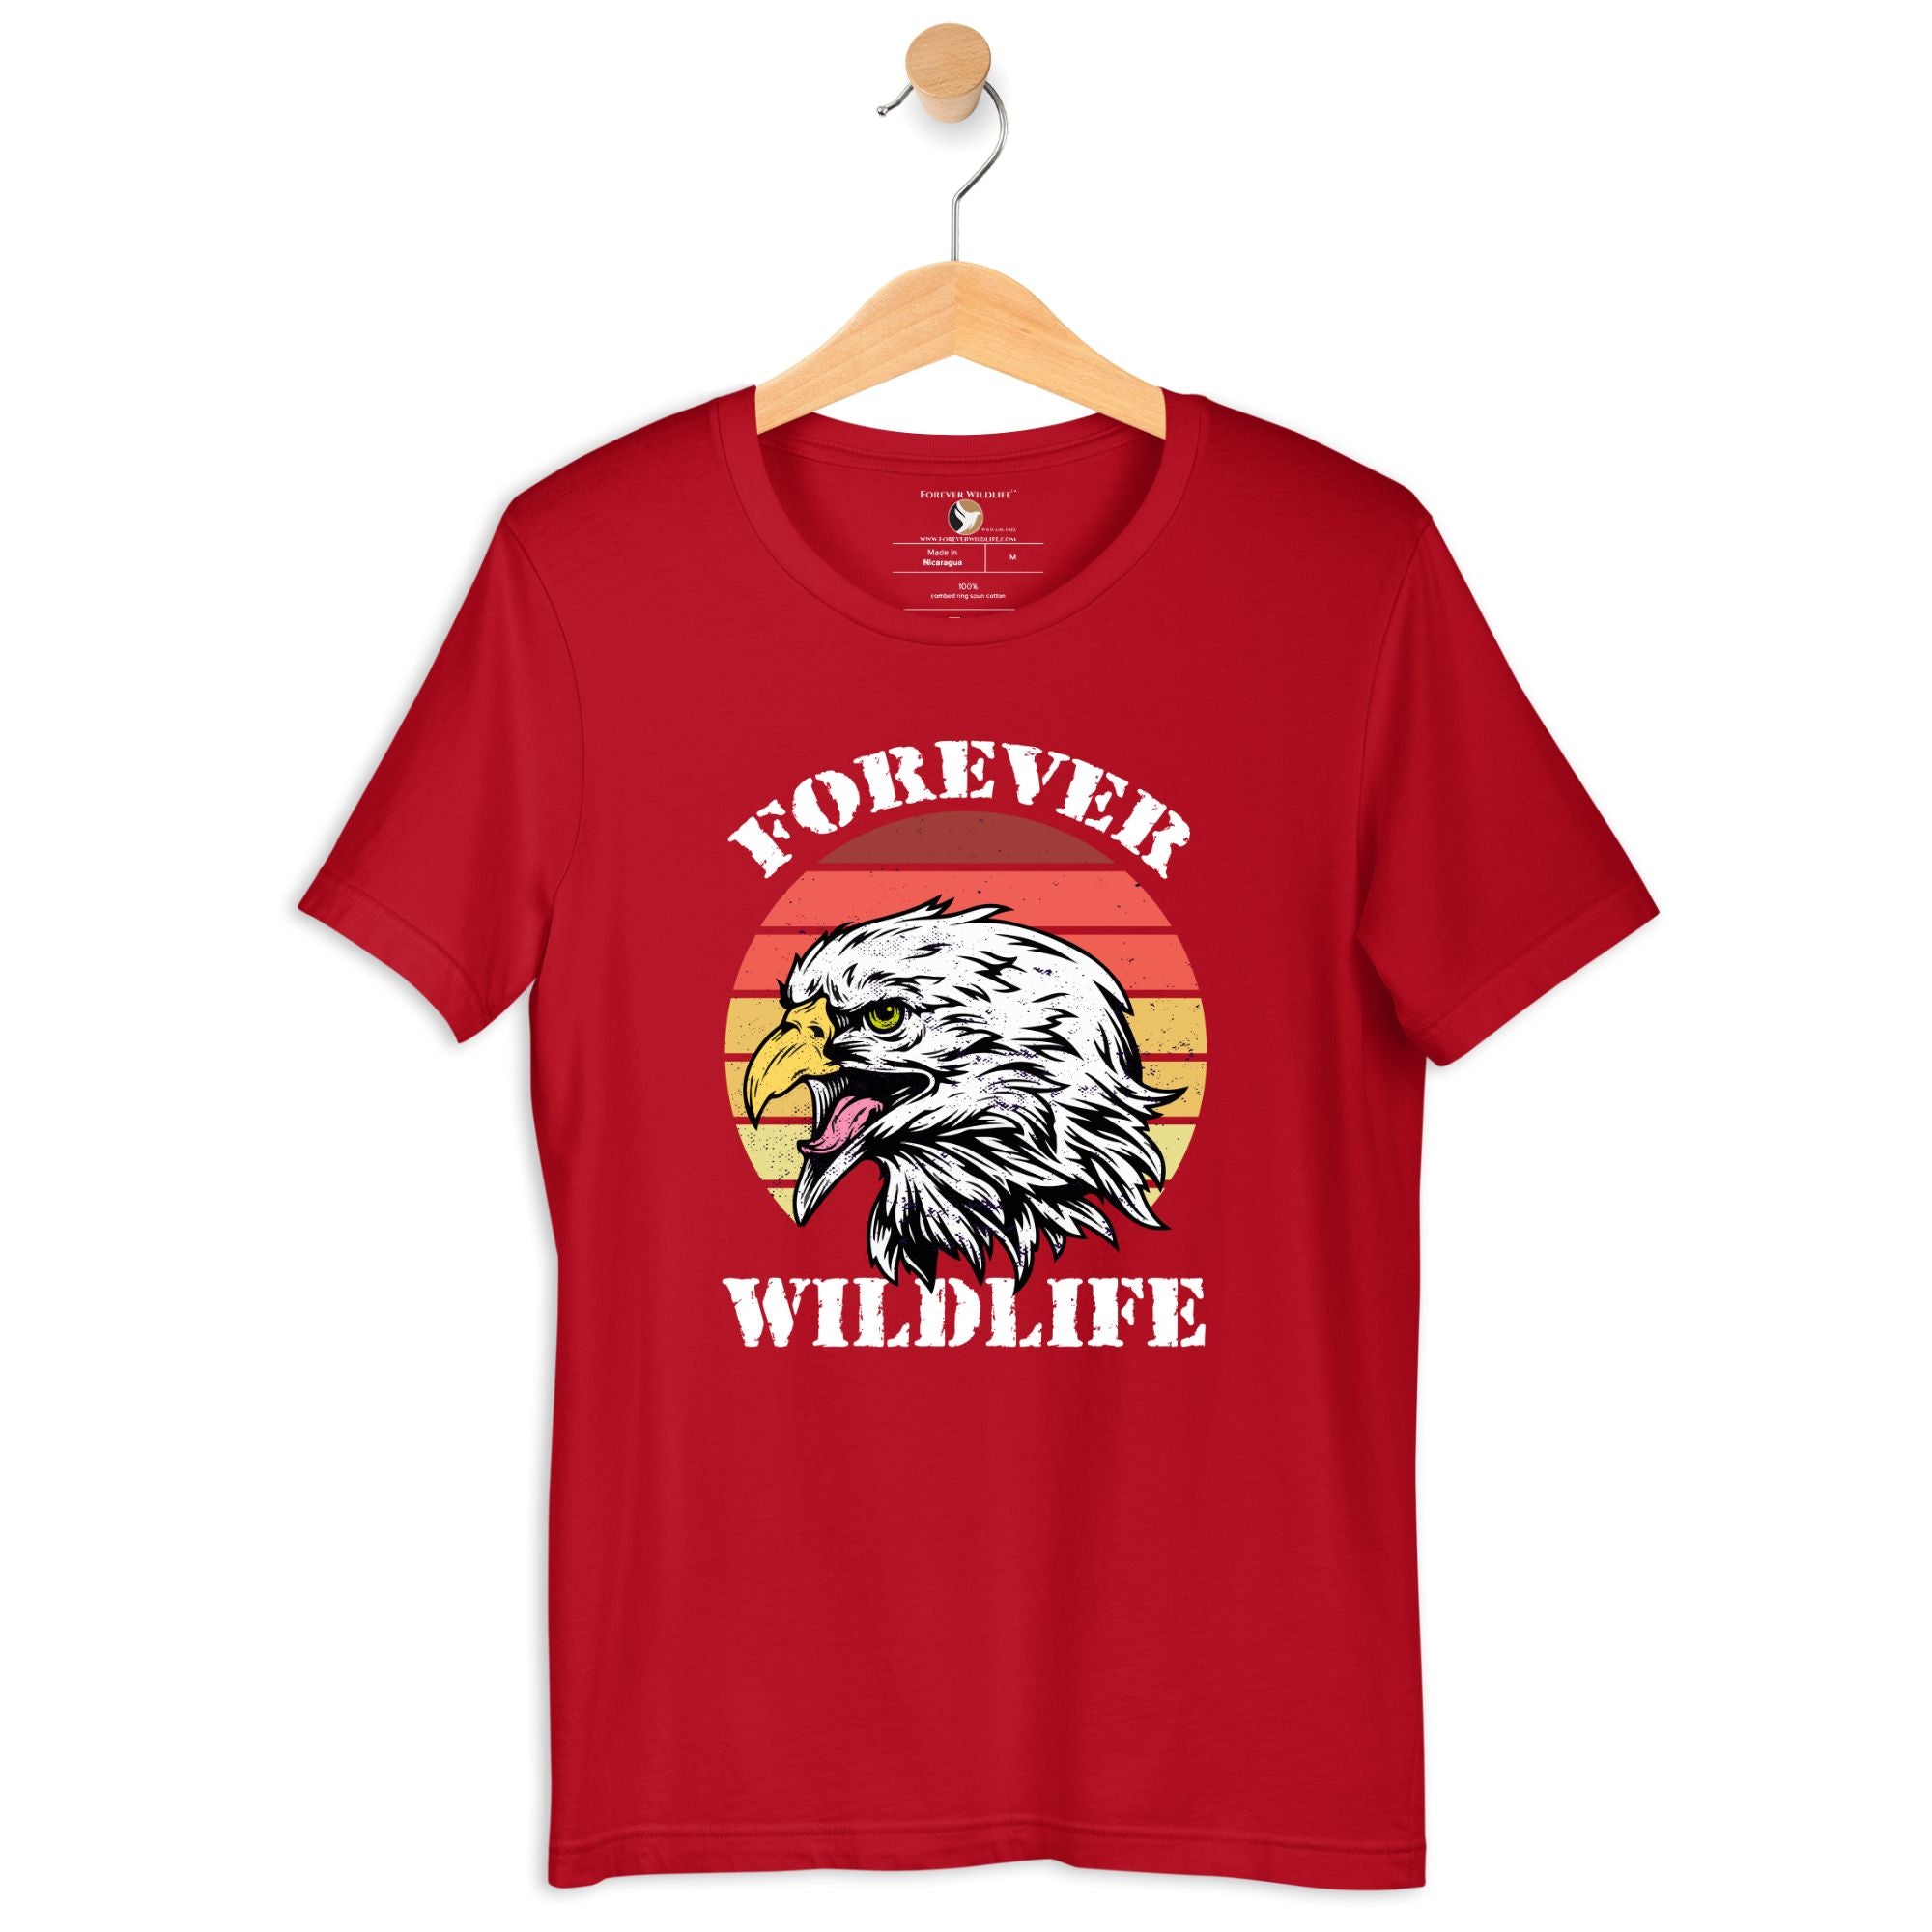 Eagle T-Shirt in Red – Premium Wildlife T-Shirt Design, Eagle Shirts and Wildlife Clothing from Forever Wildlife